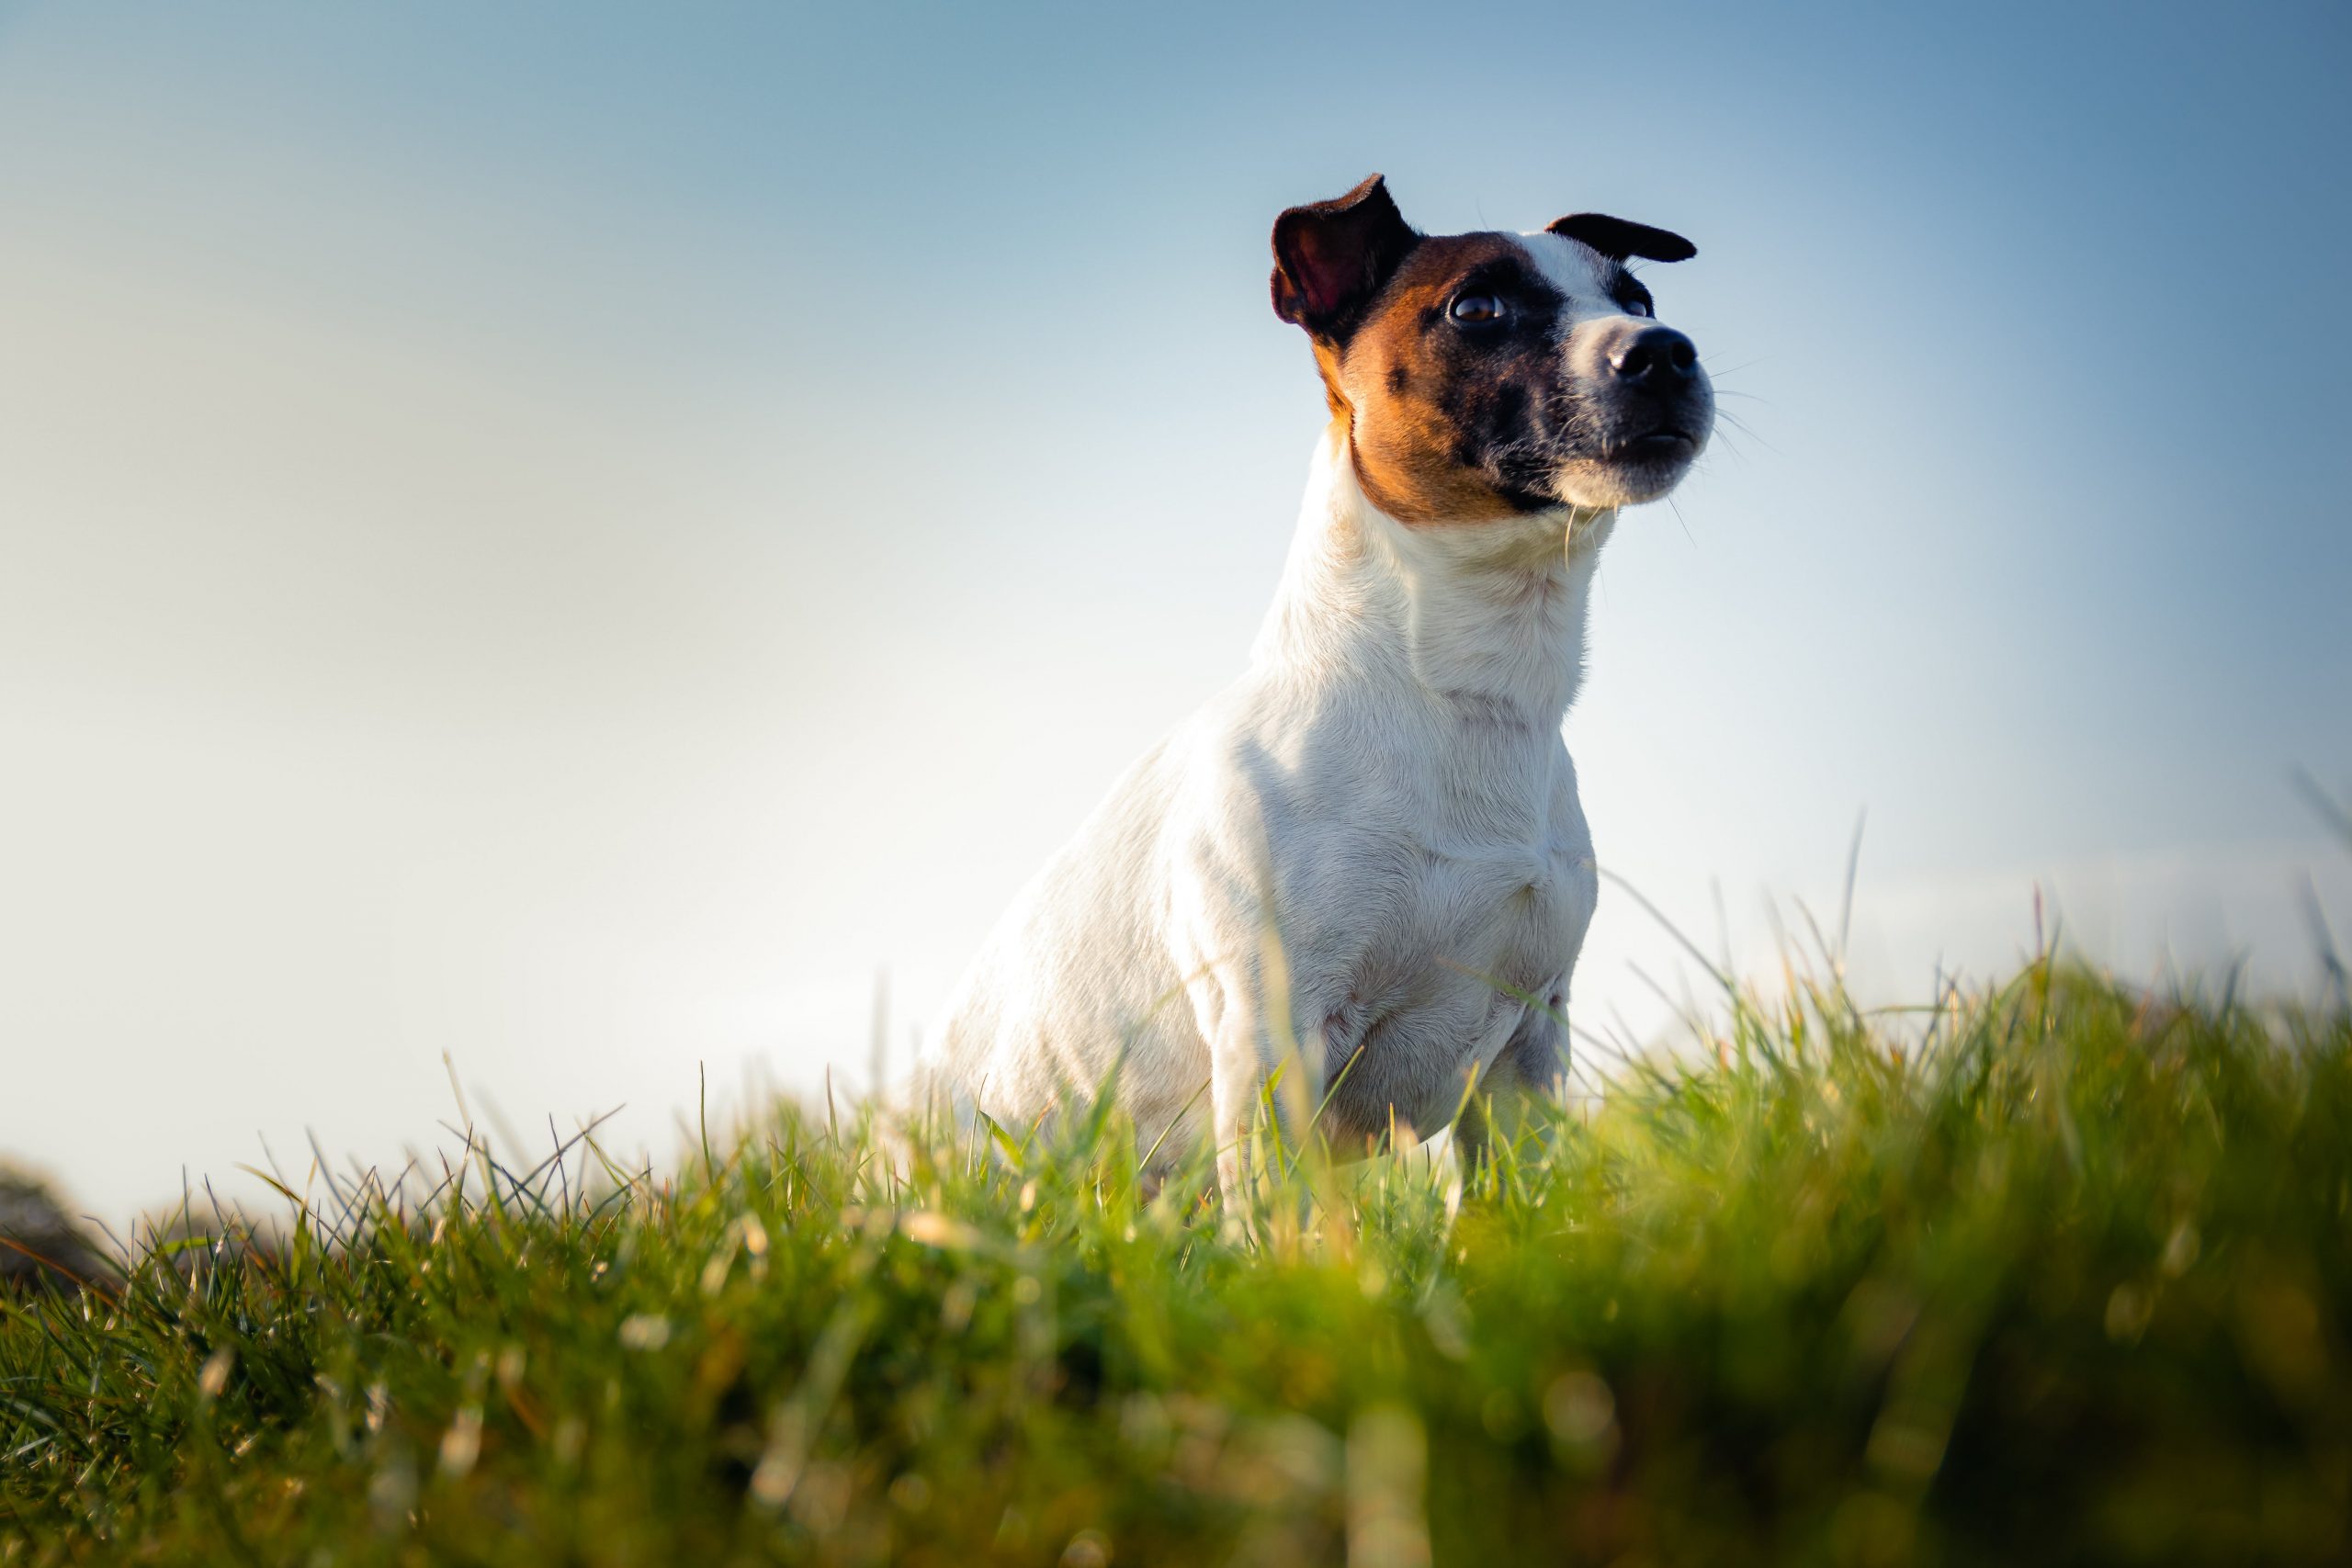 How Often Do You Need To Groom a Jack Russell?